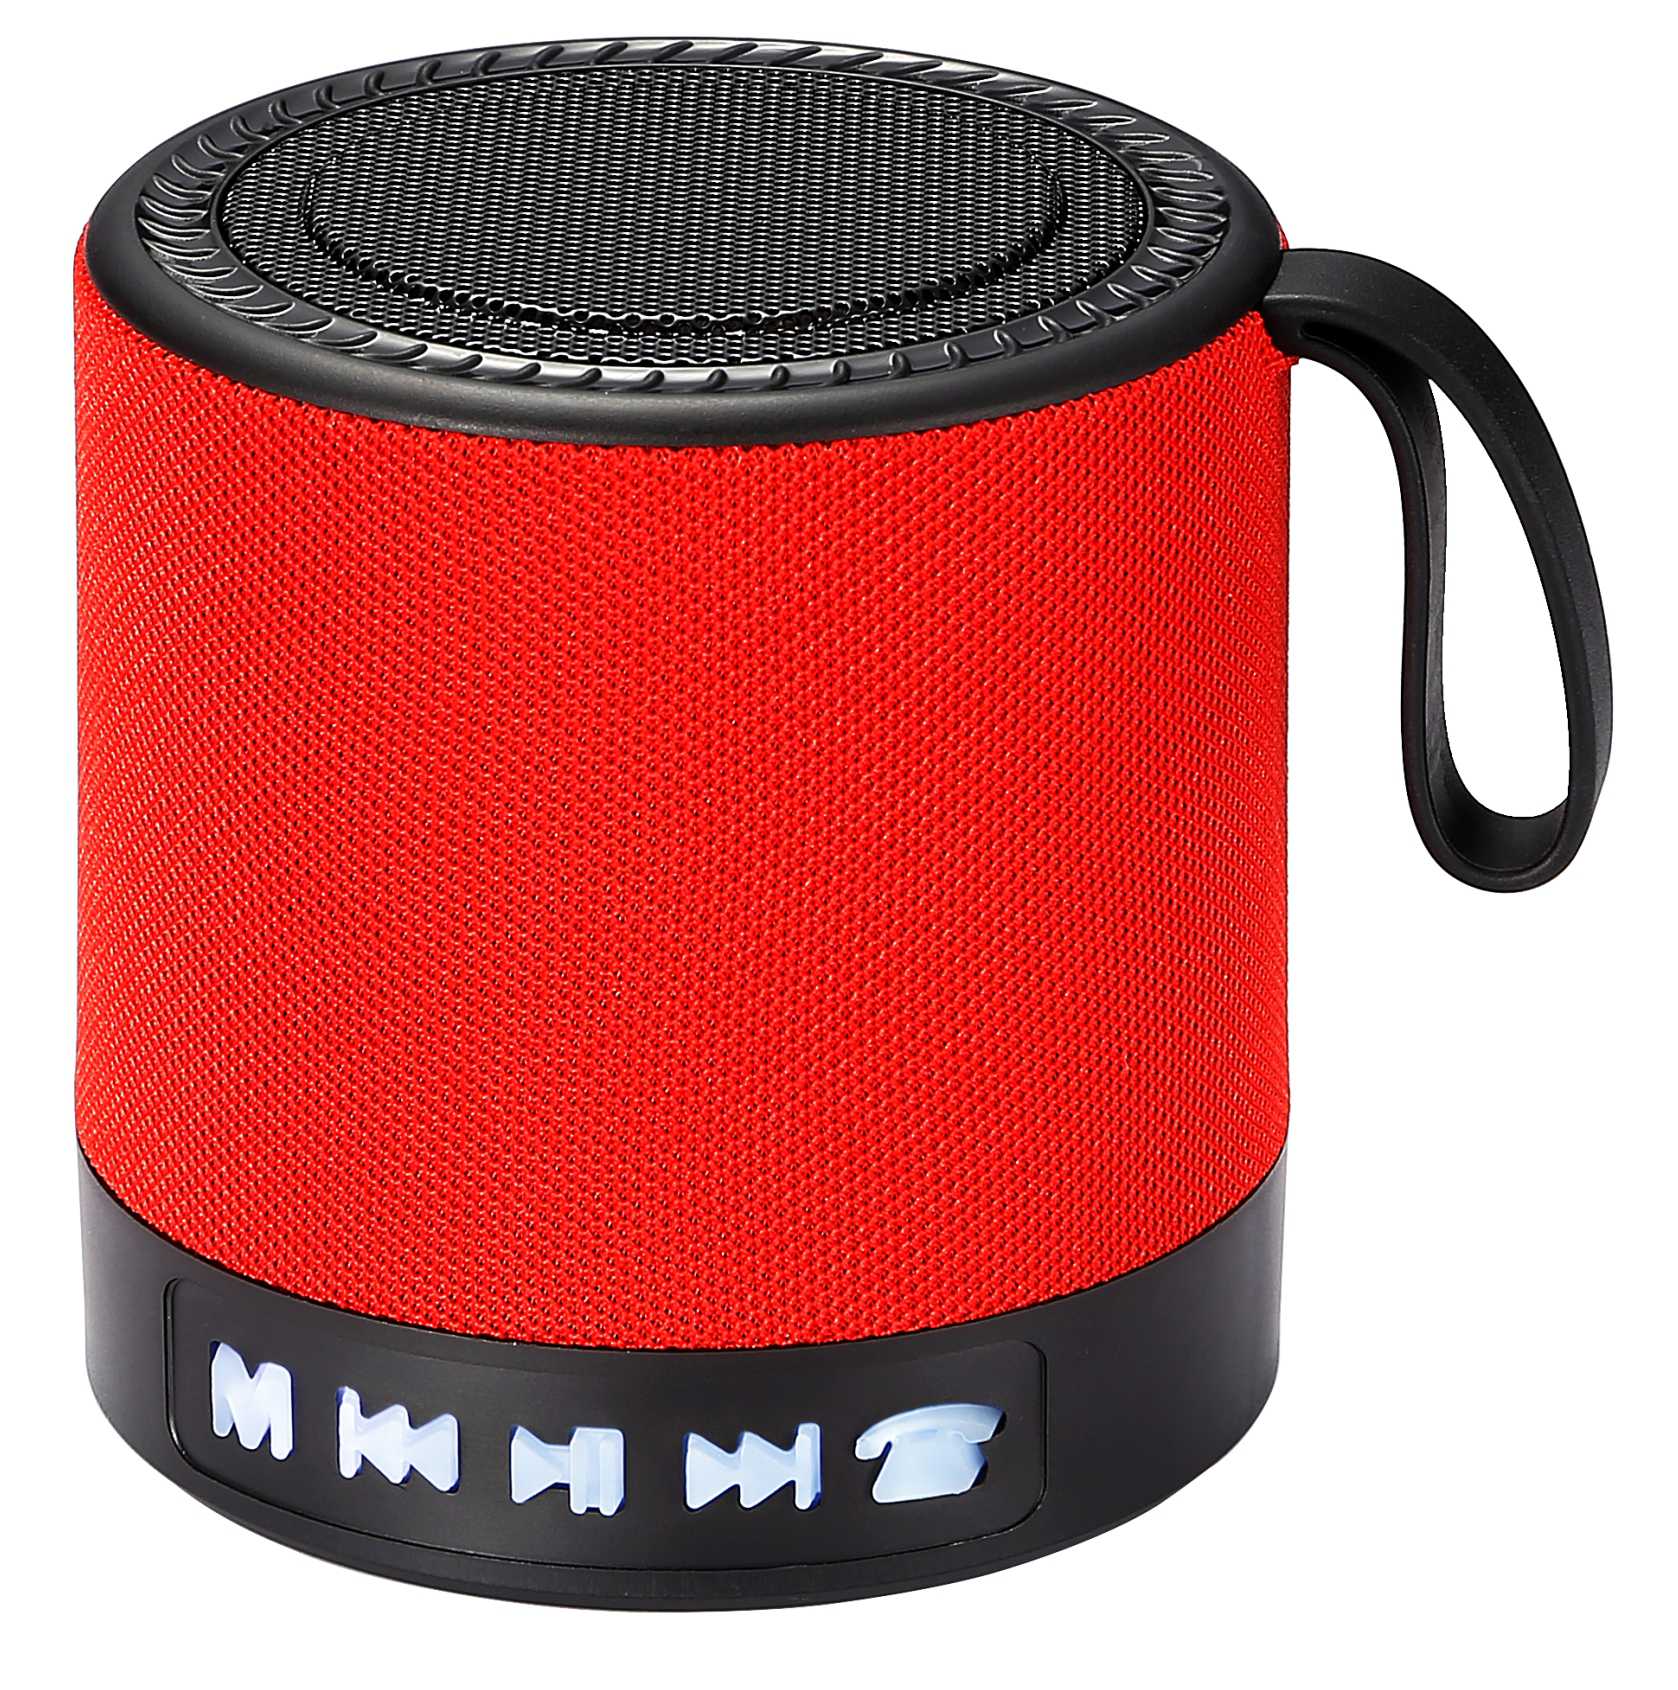 HS-2688 Portable mini Bluetooth speaker for hands-free calling at home, outdoor